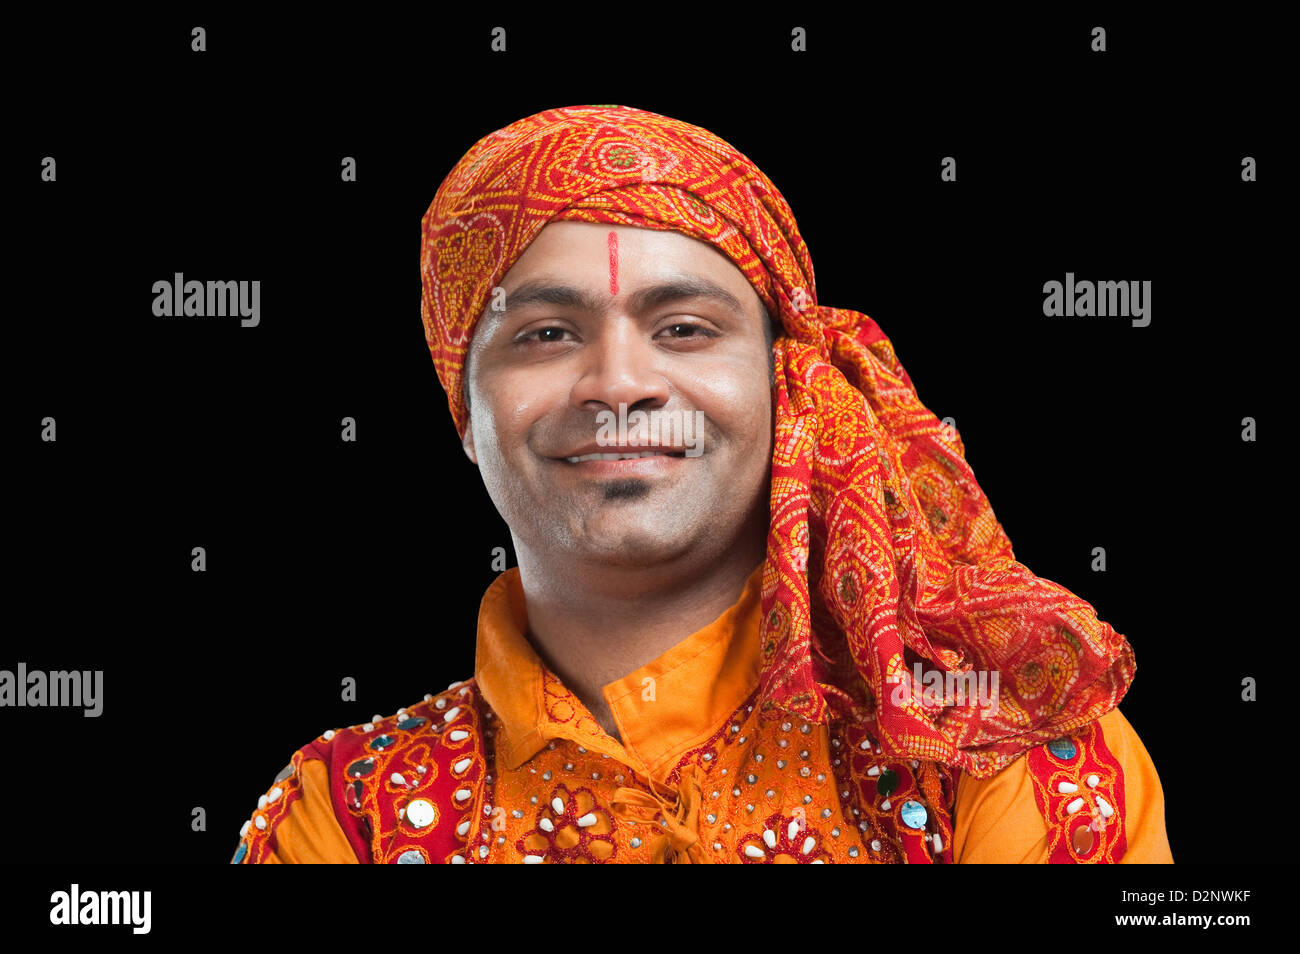 Portrait of a man smiling Stock Photo